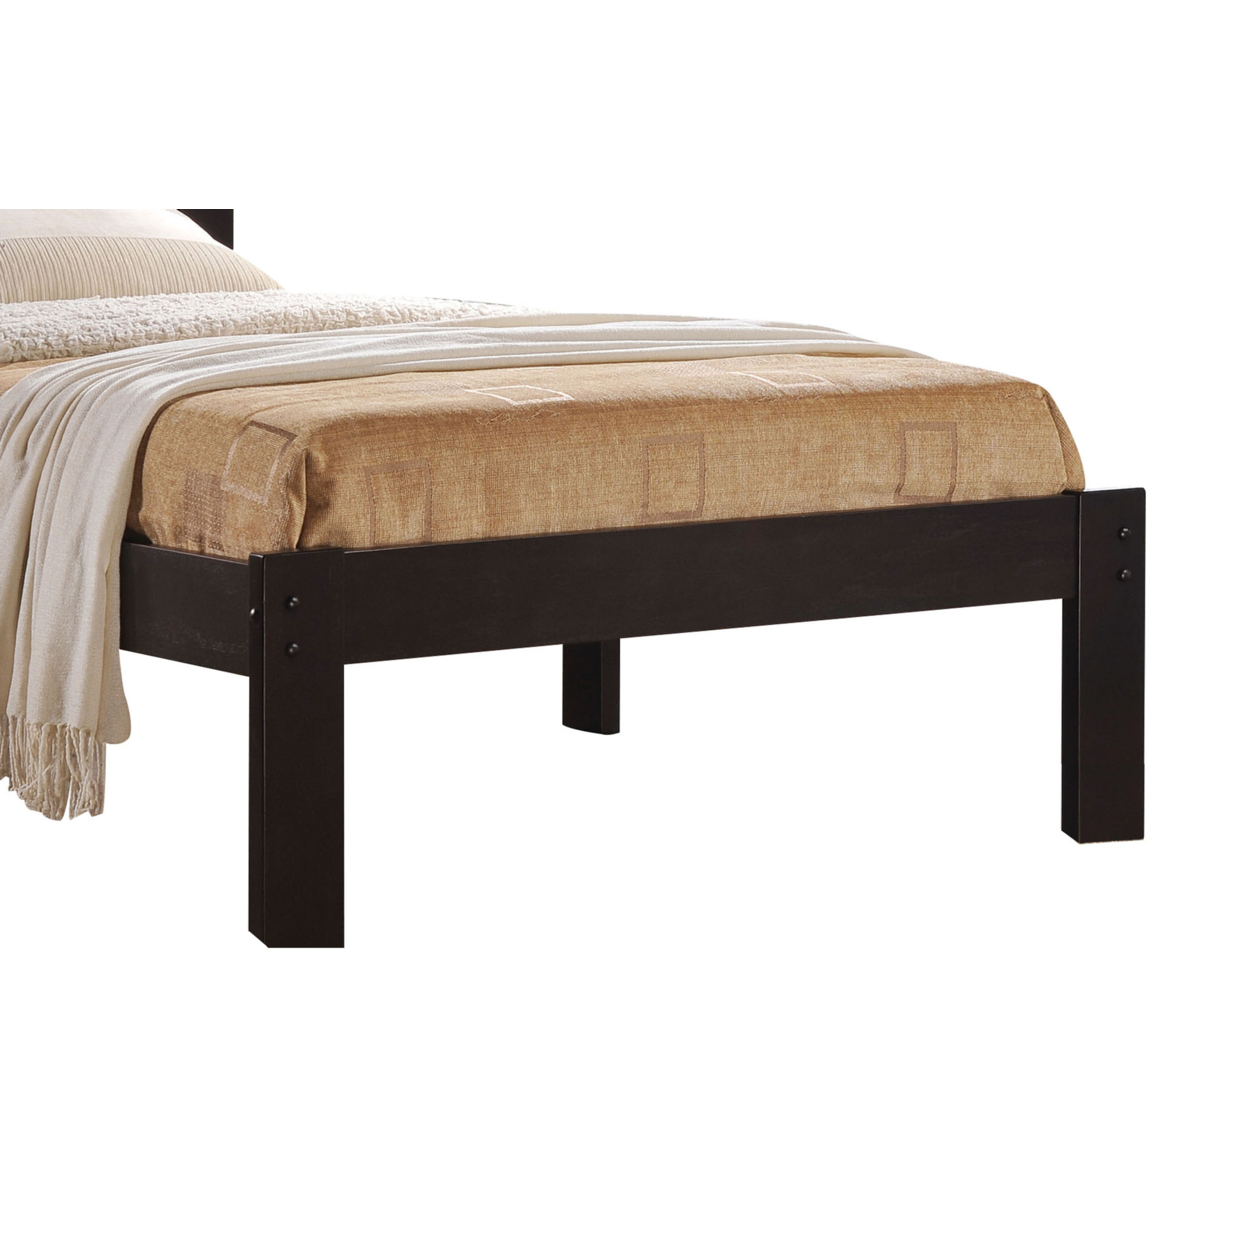 Contemporary Style Wooden Full Size Bed With Slatted Headboard, Brown- Saltoro Sherpi